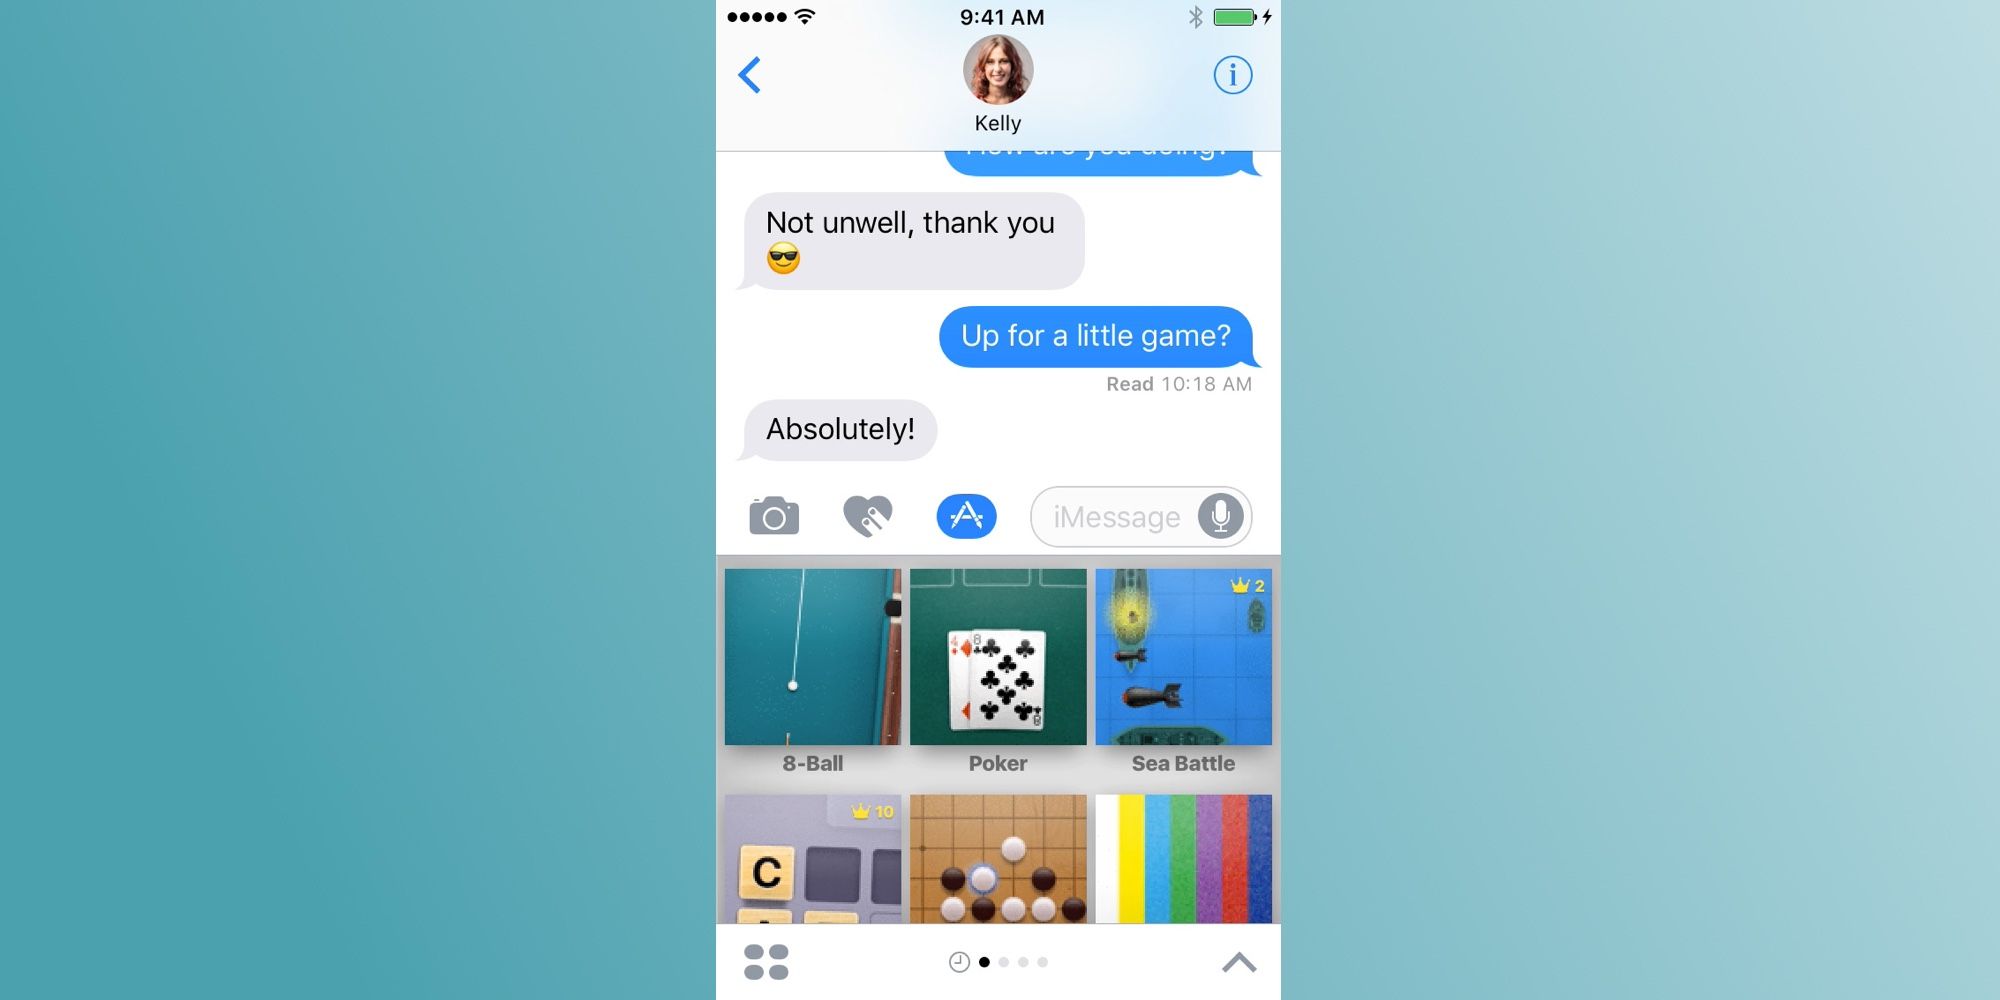 GamePigeon game options shown in an iMessage chat on iPhone